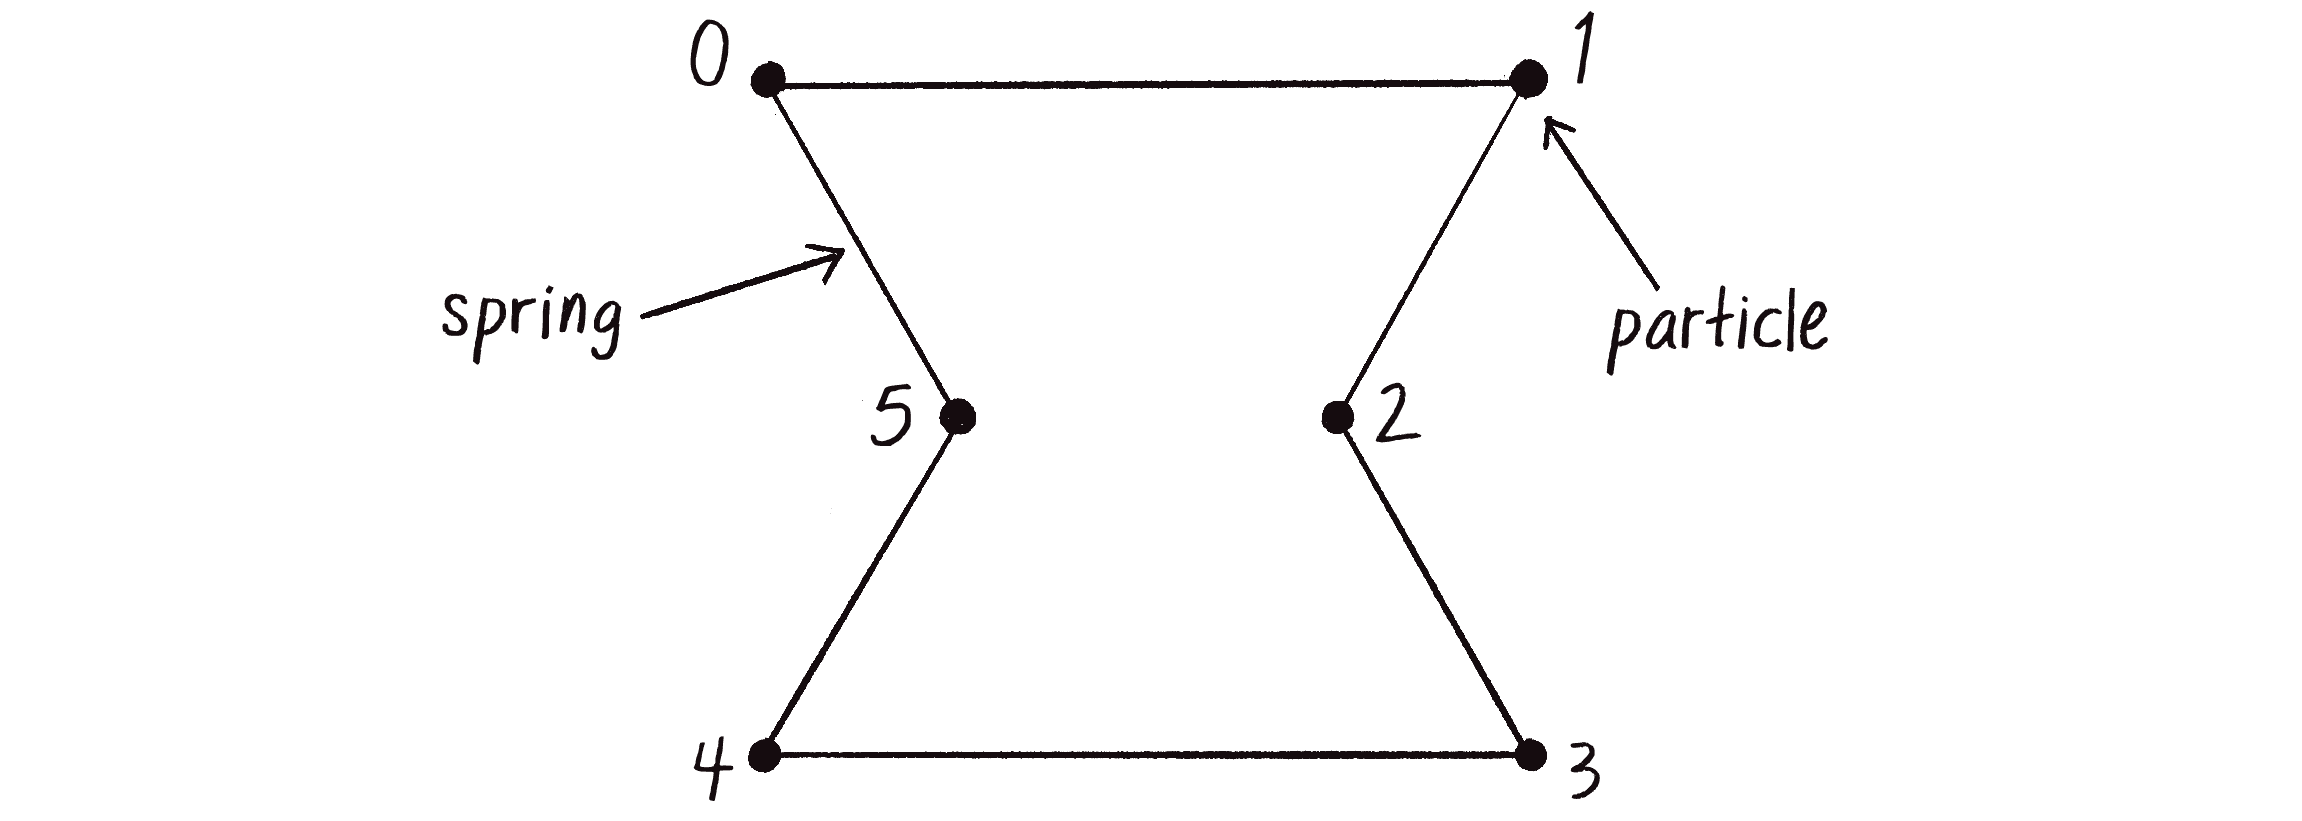 Figure 6.16: A skeleton for a soft-body character. The vertices are numbered according to their positions in an array.